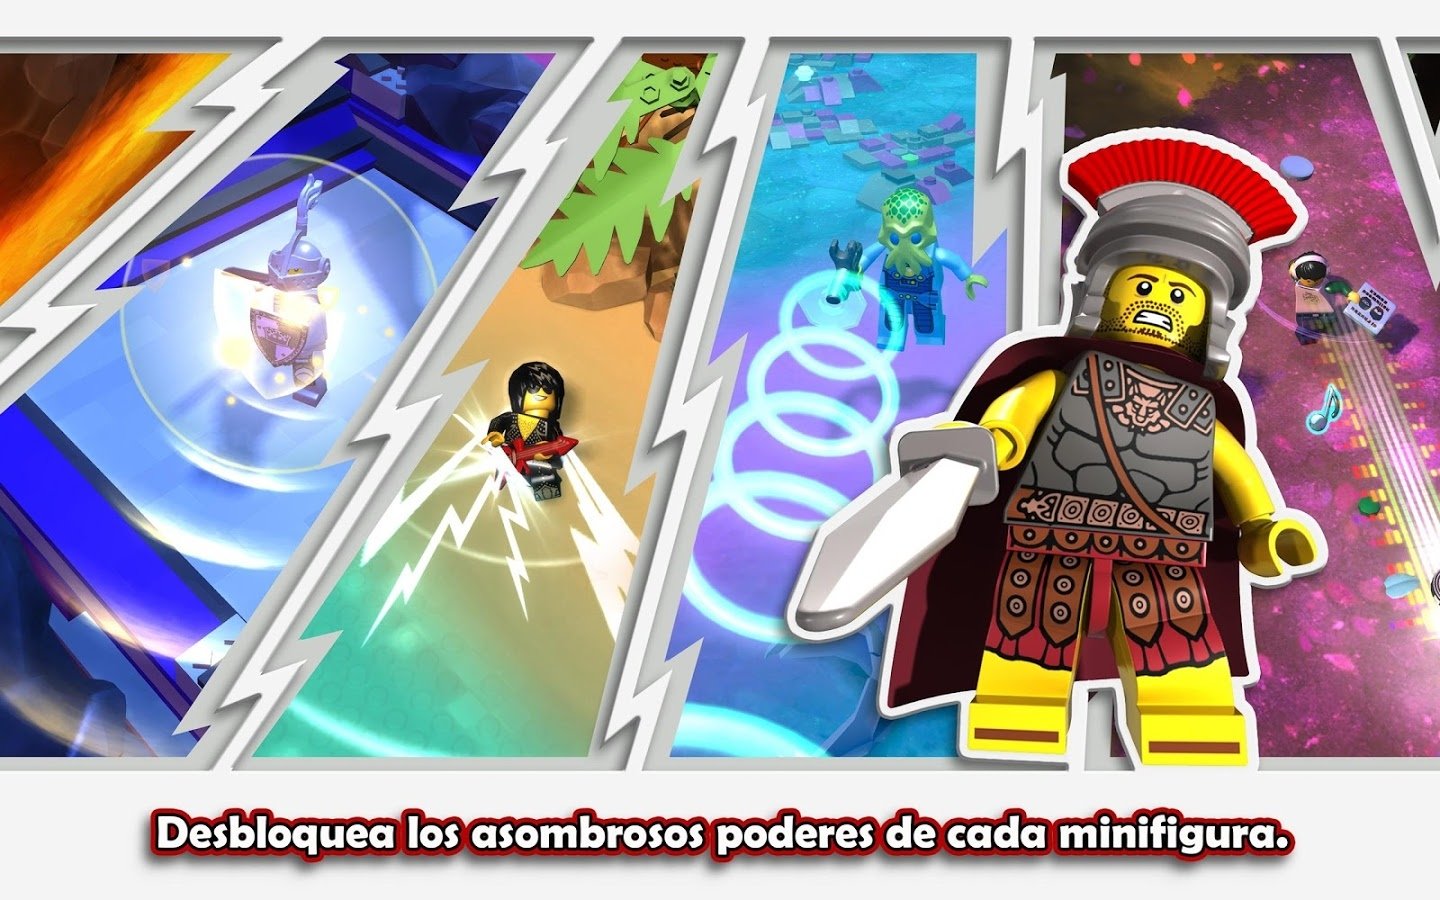 download lego minifigures online for free